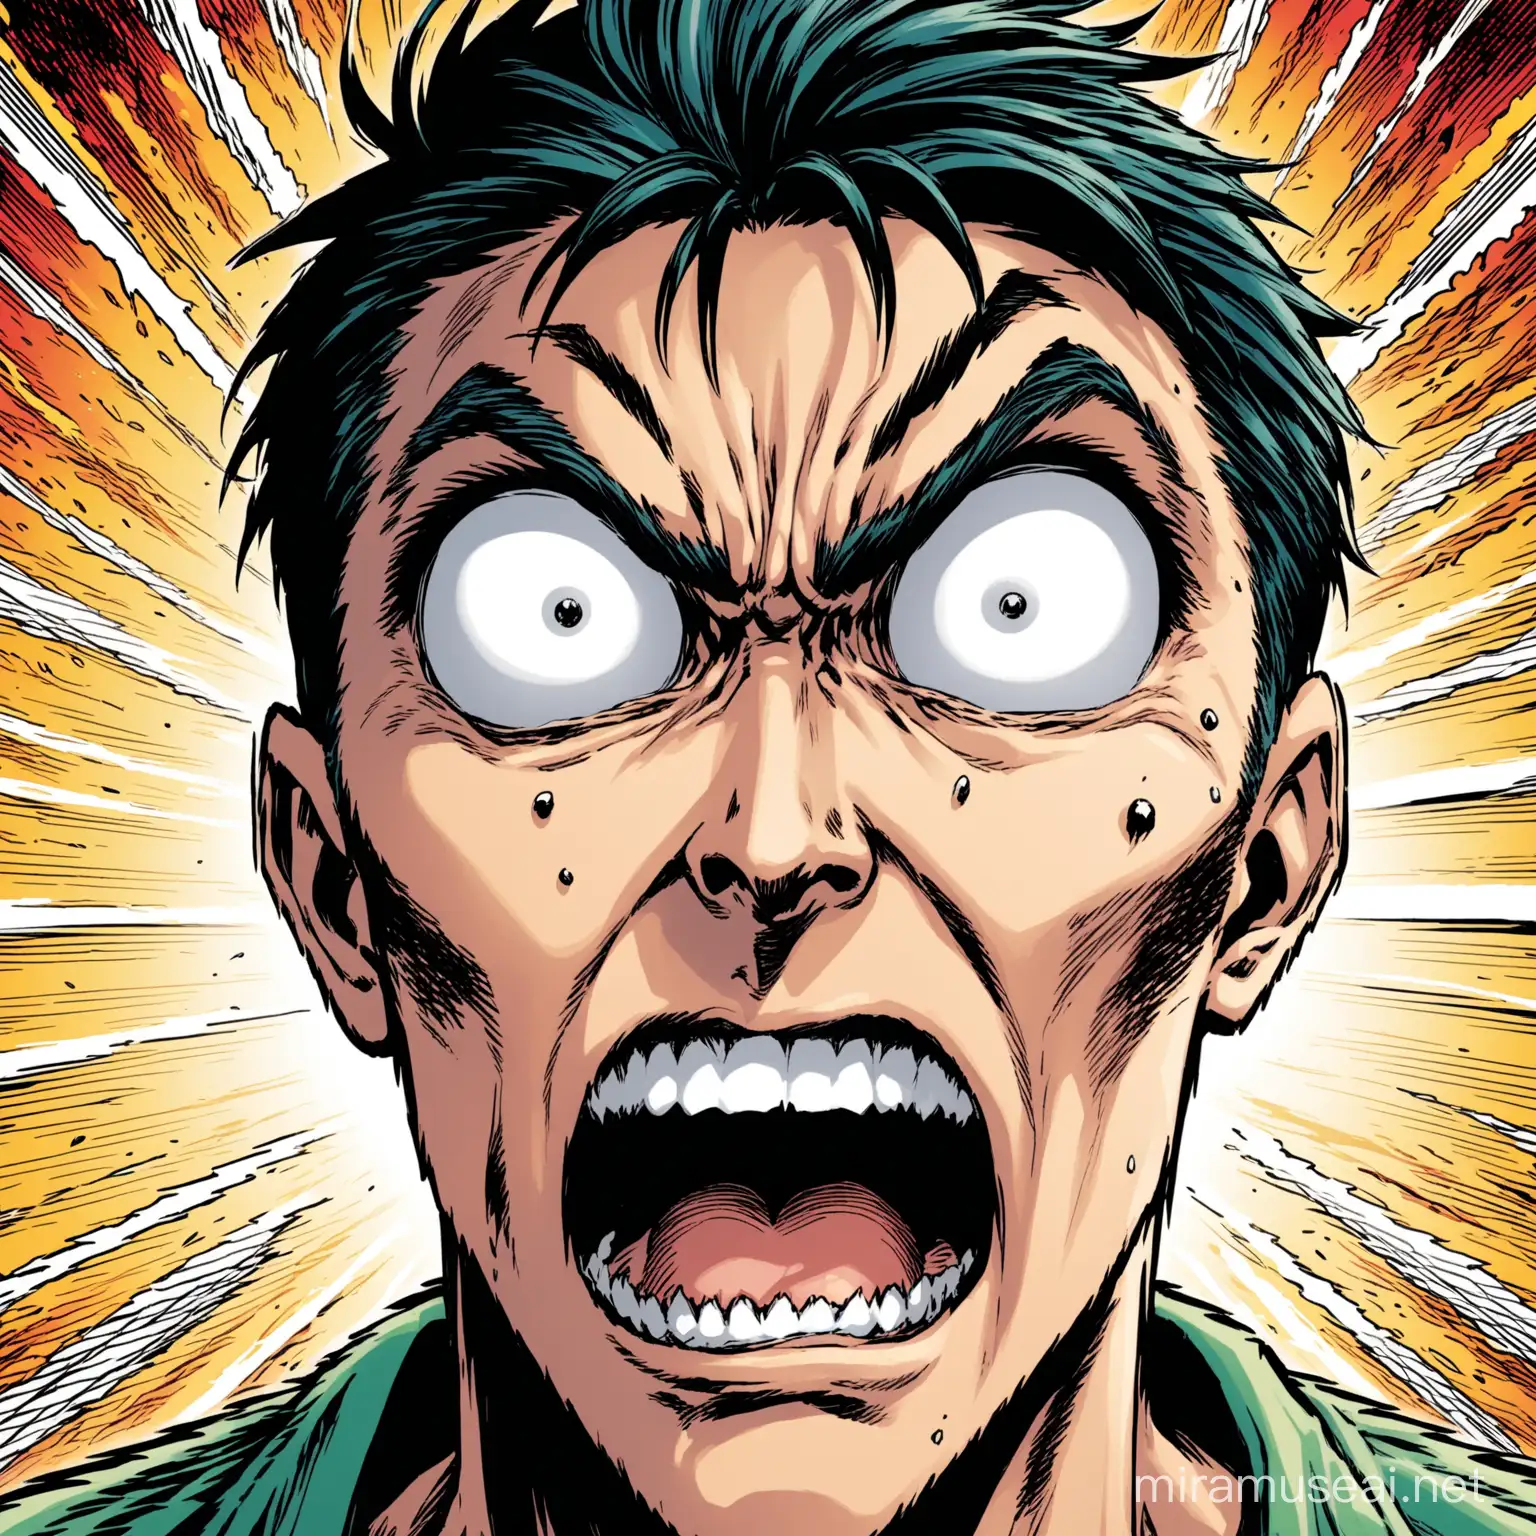 Close-up of a man’s horrified face drawn in comic book form